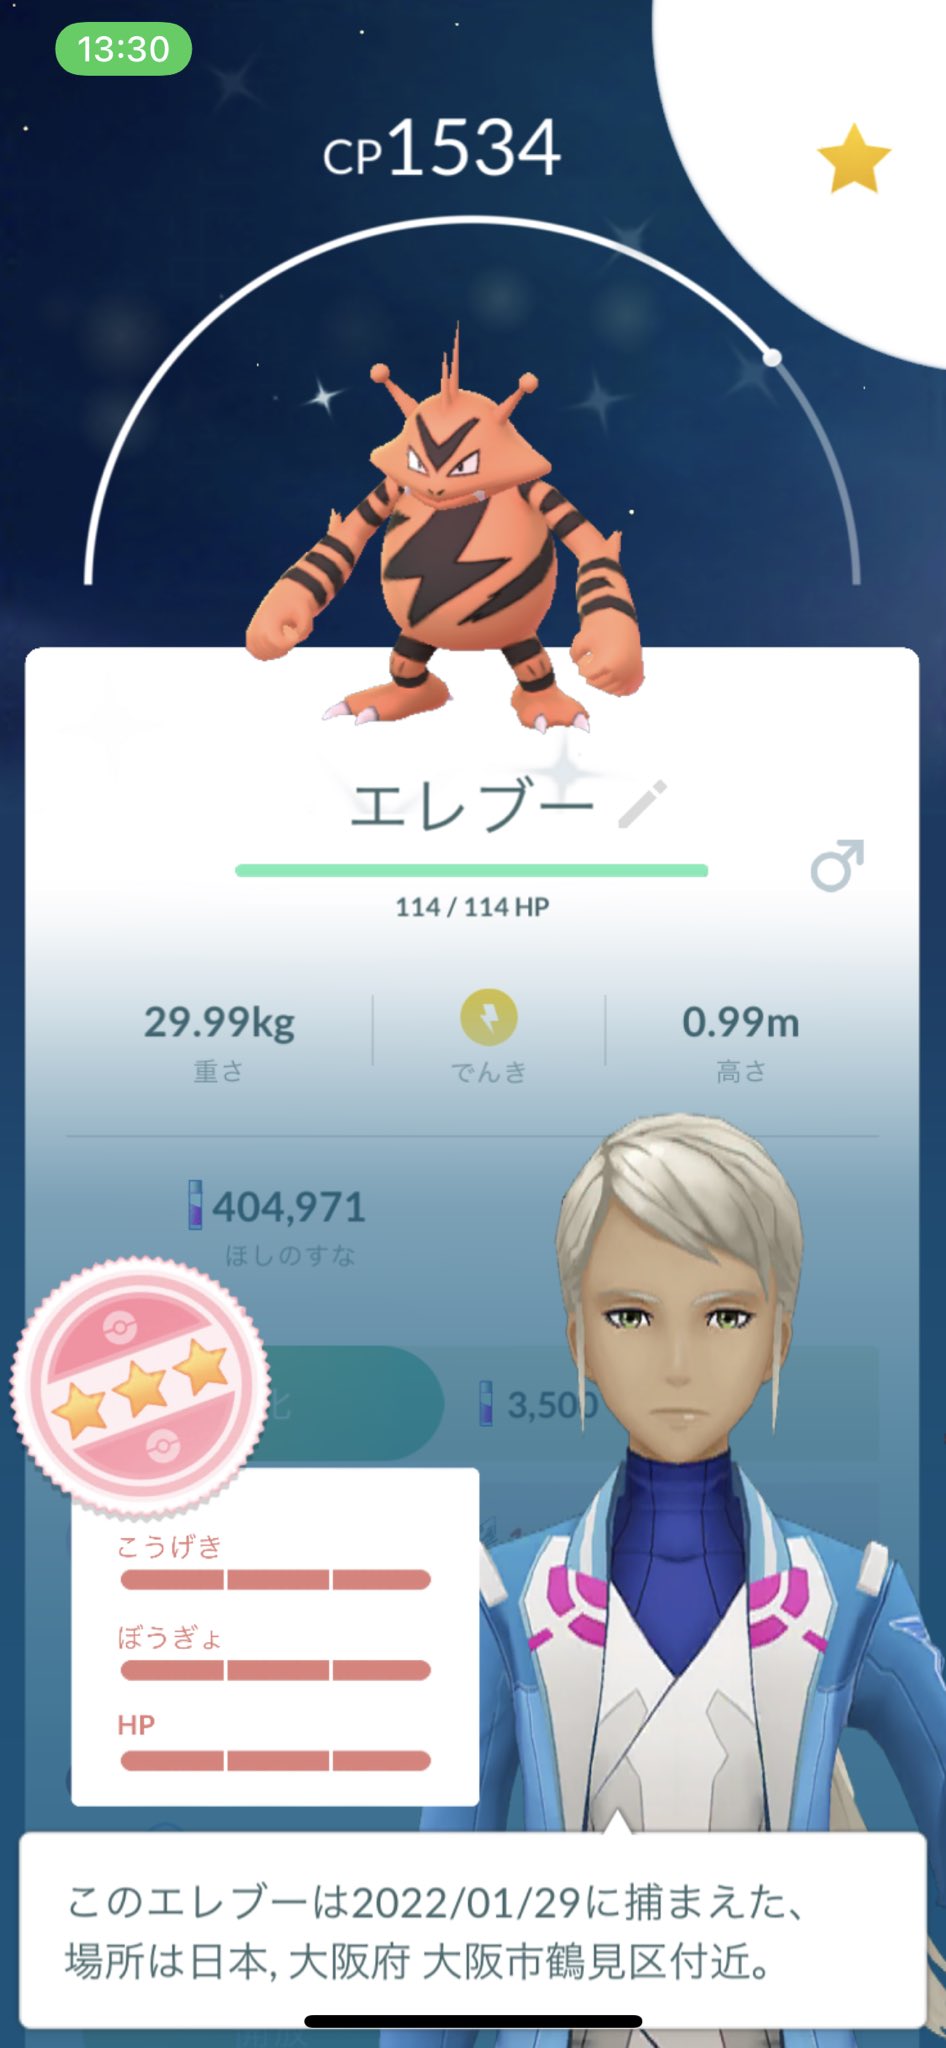 Chaowukong ポケモンgo Chaowukong R Twitter